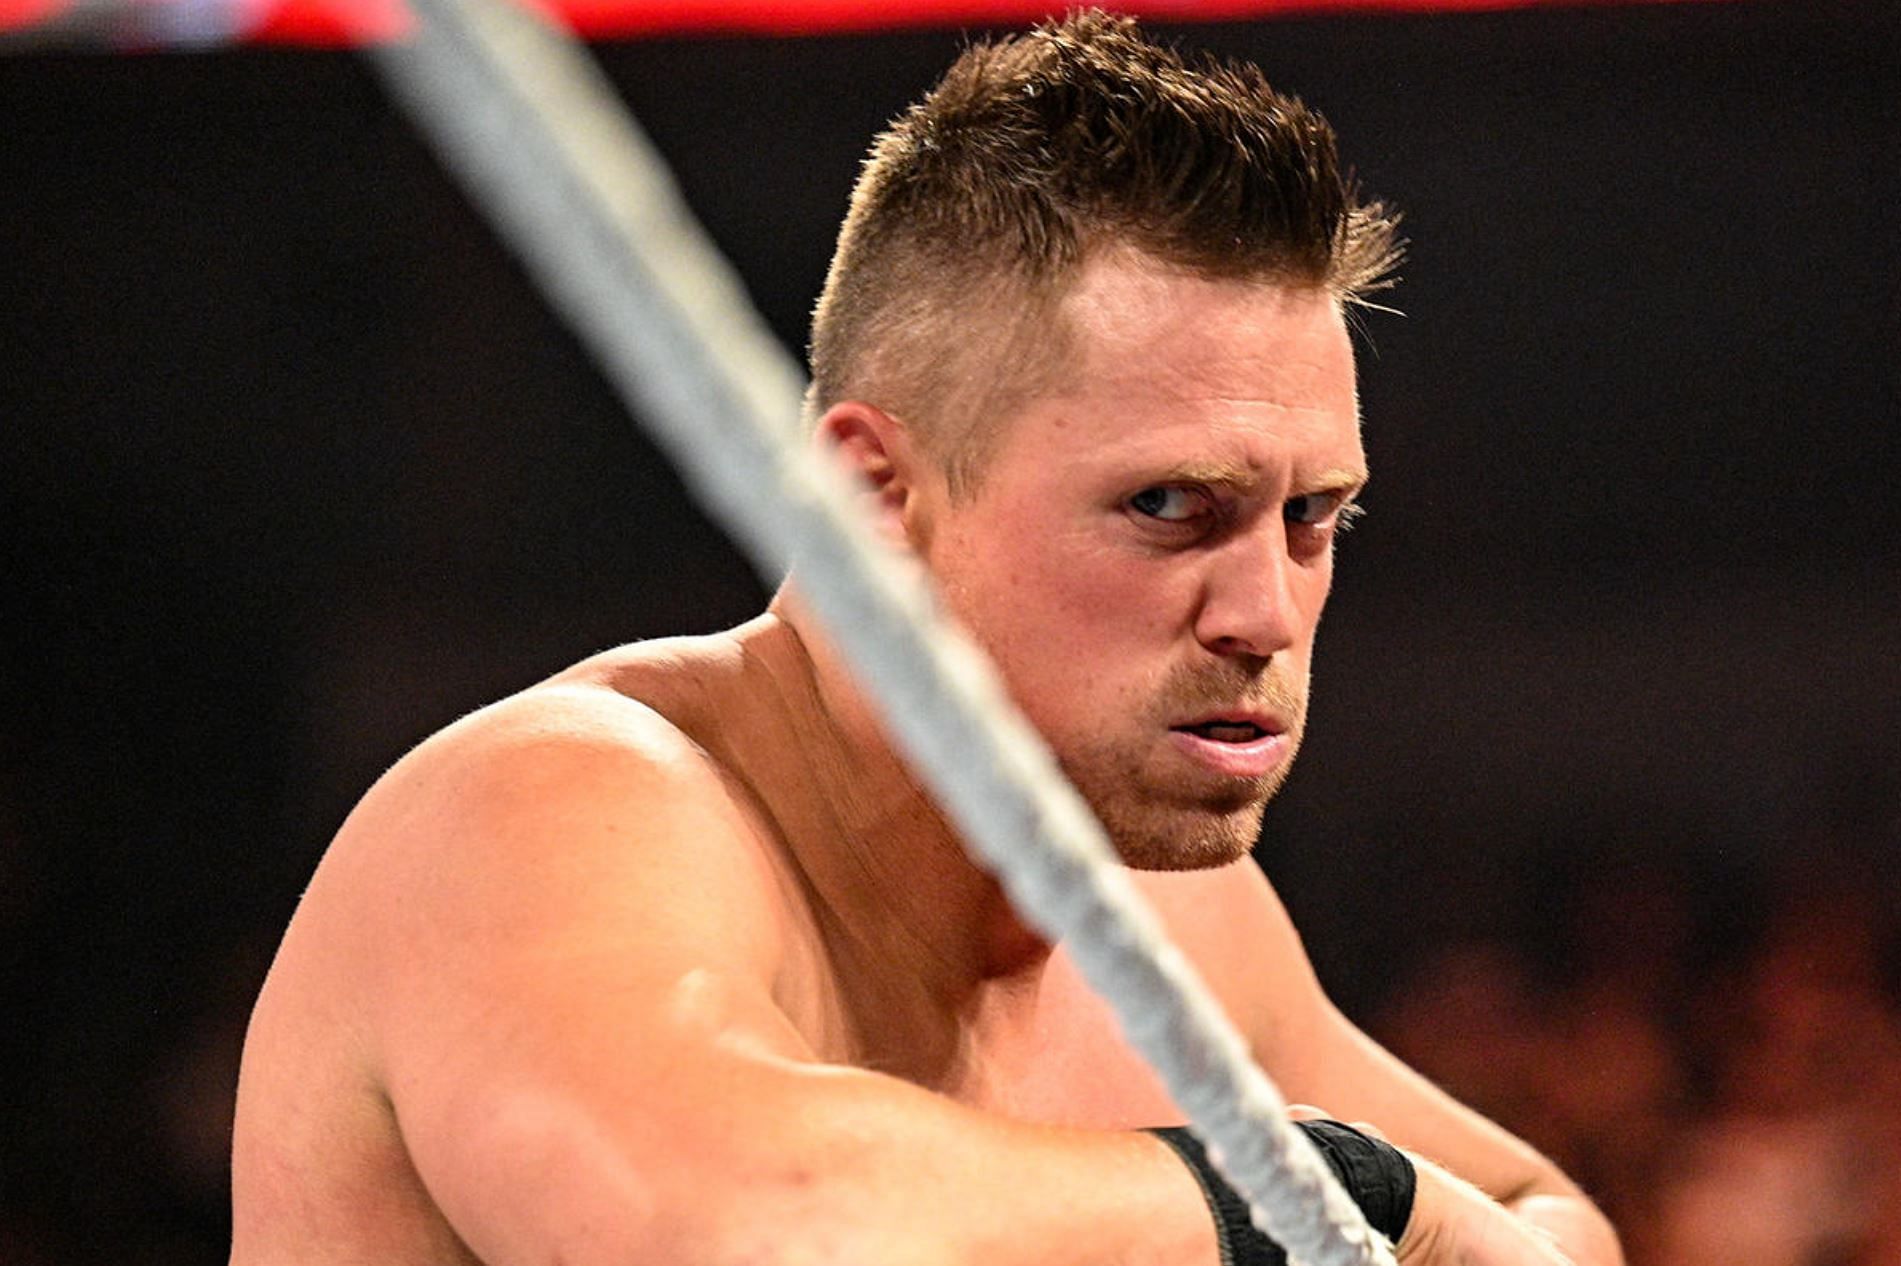 The Miz is a former two-time WWE Champion